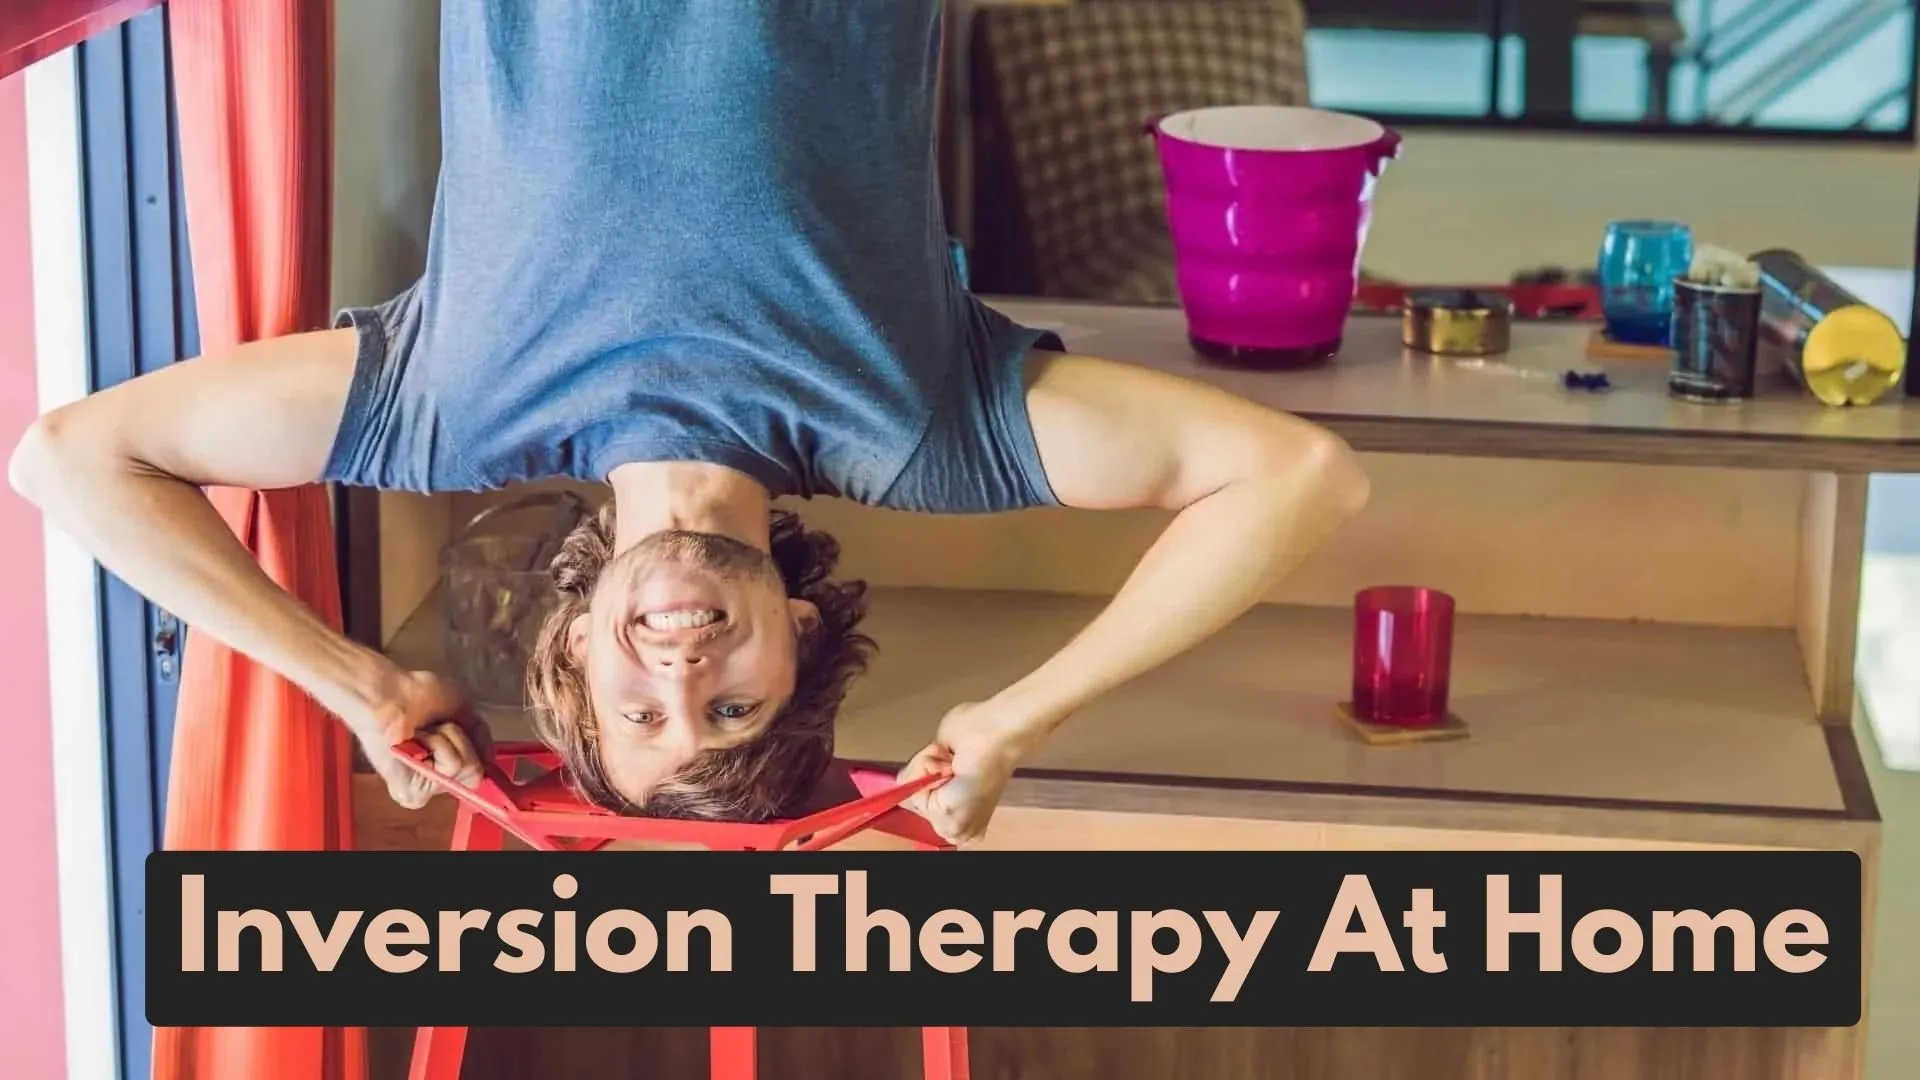 Inversion Therapy at Home to Fix Posture - Methods by Inversiontablehub.com Inversion Table Hub